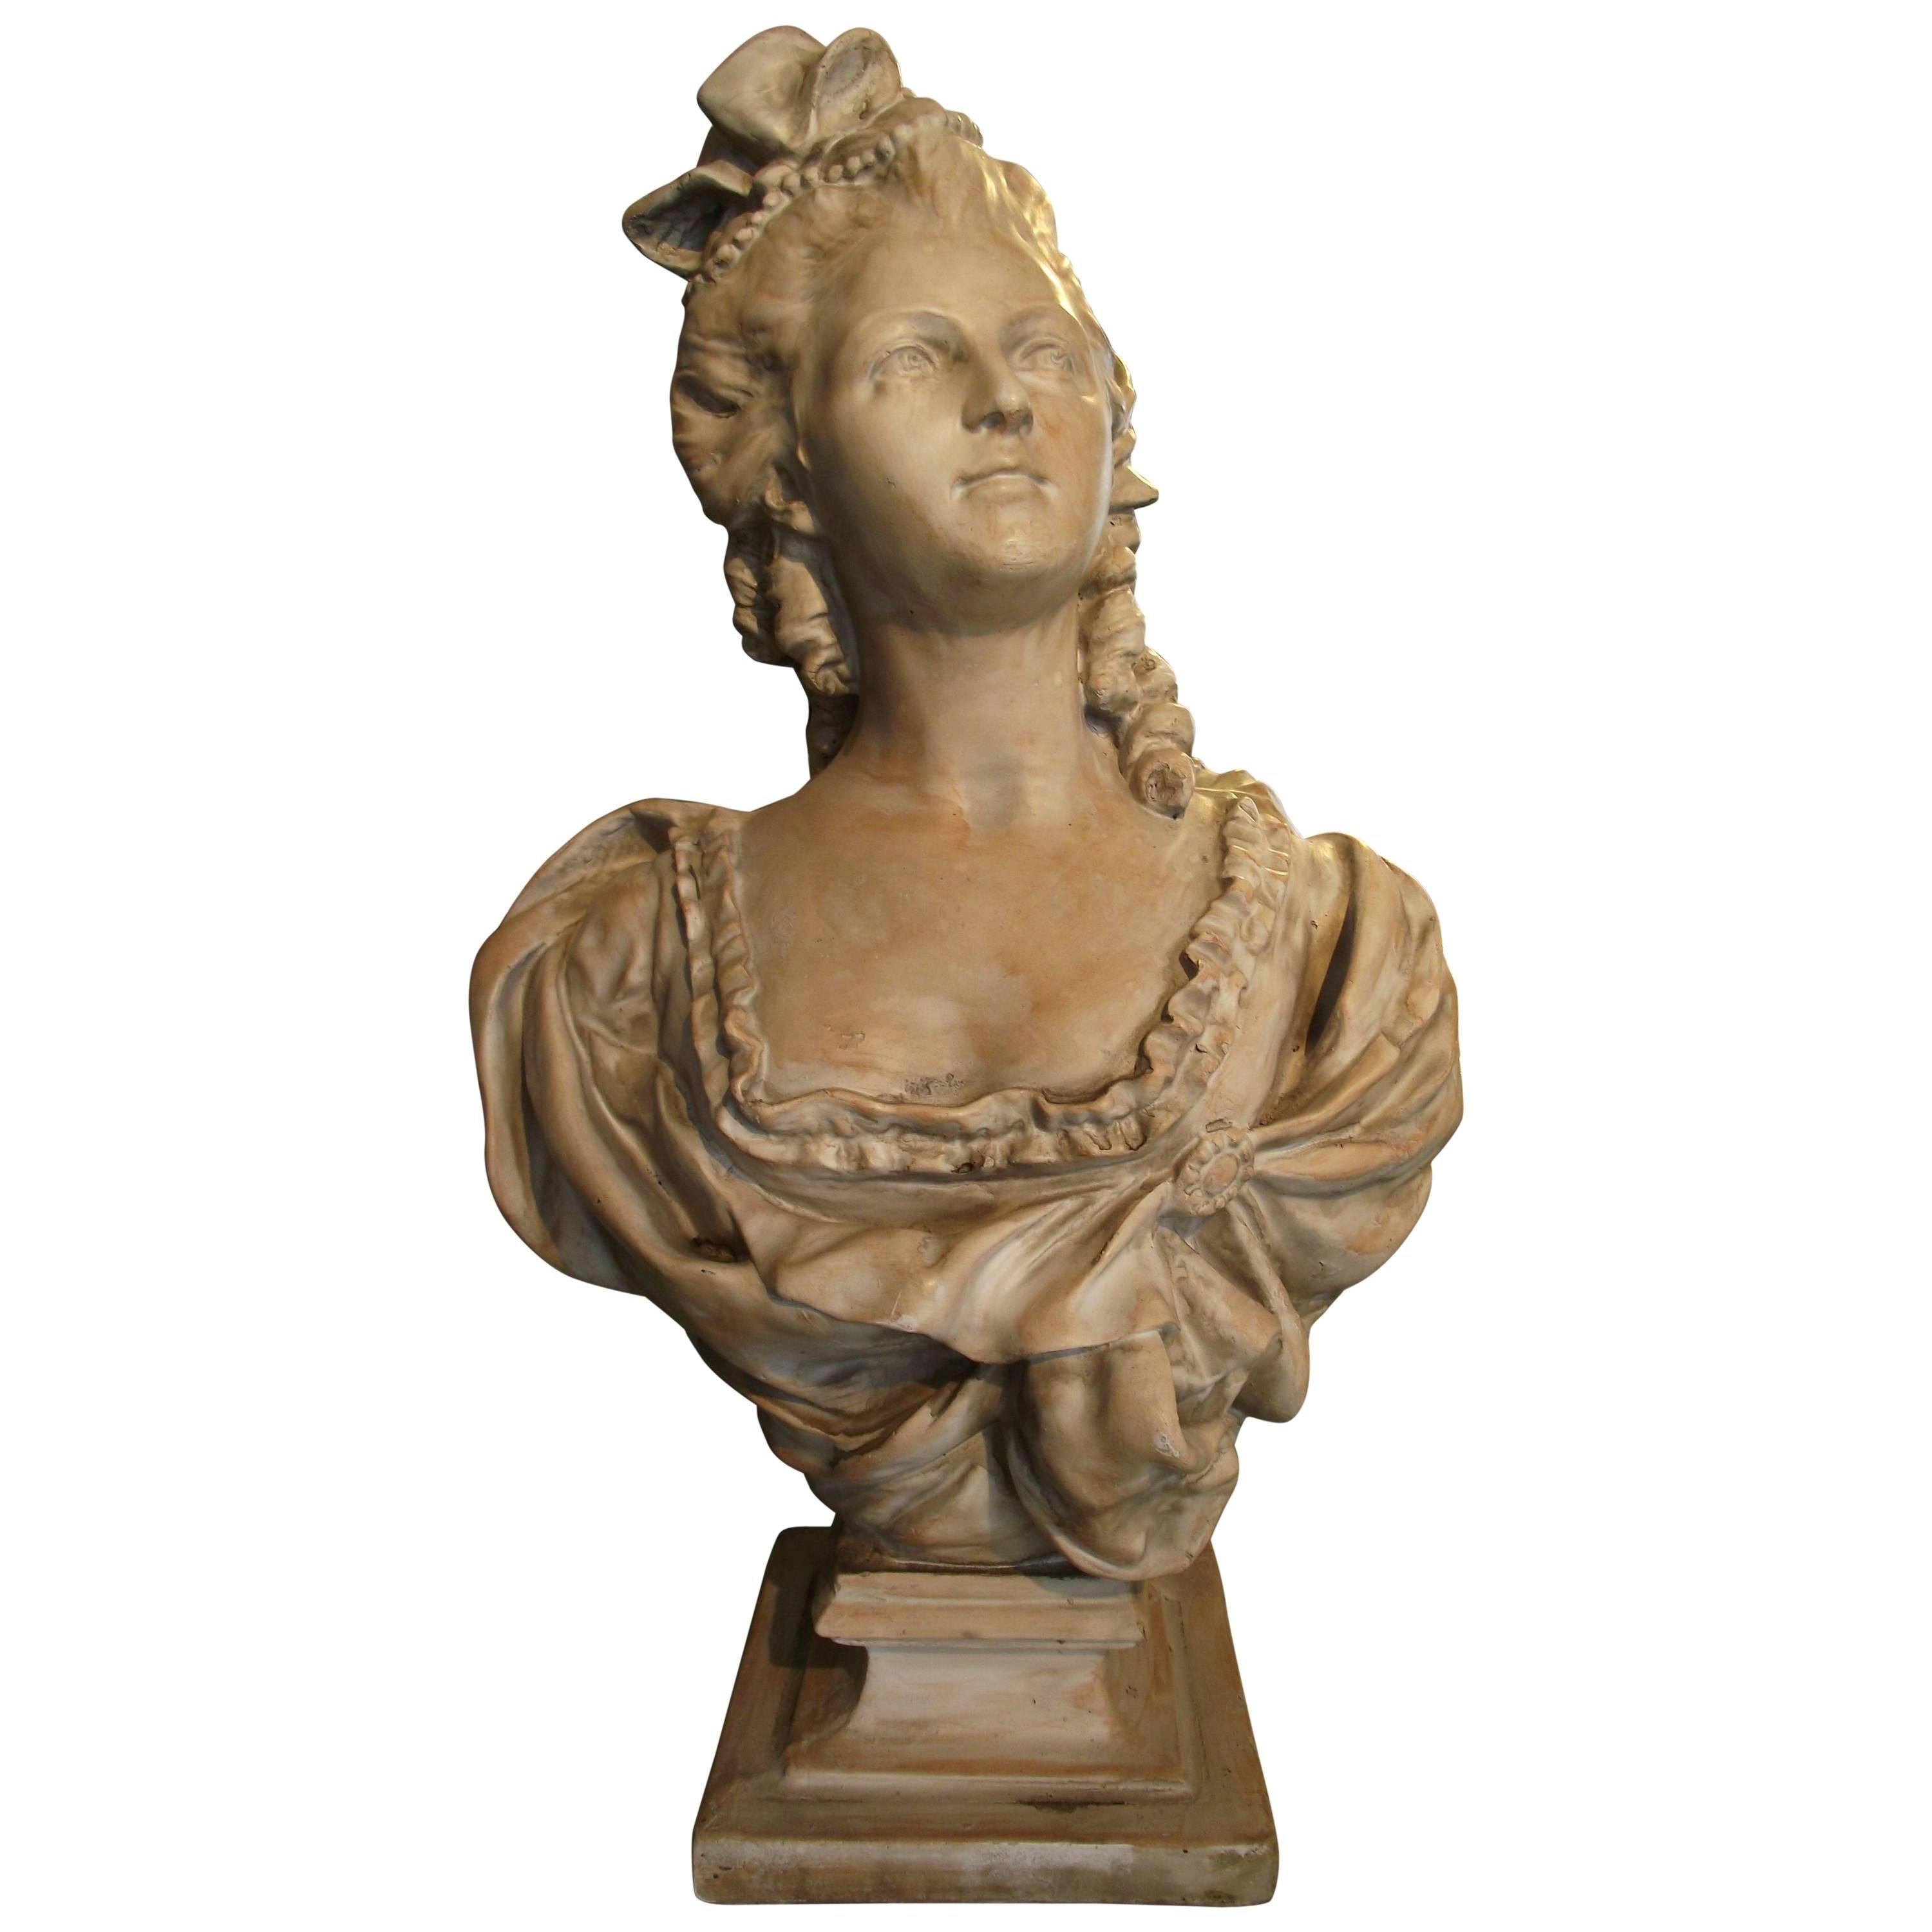 Reproduction Bust of an Aristocratic French Woman of the 1800"s